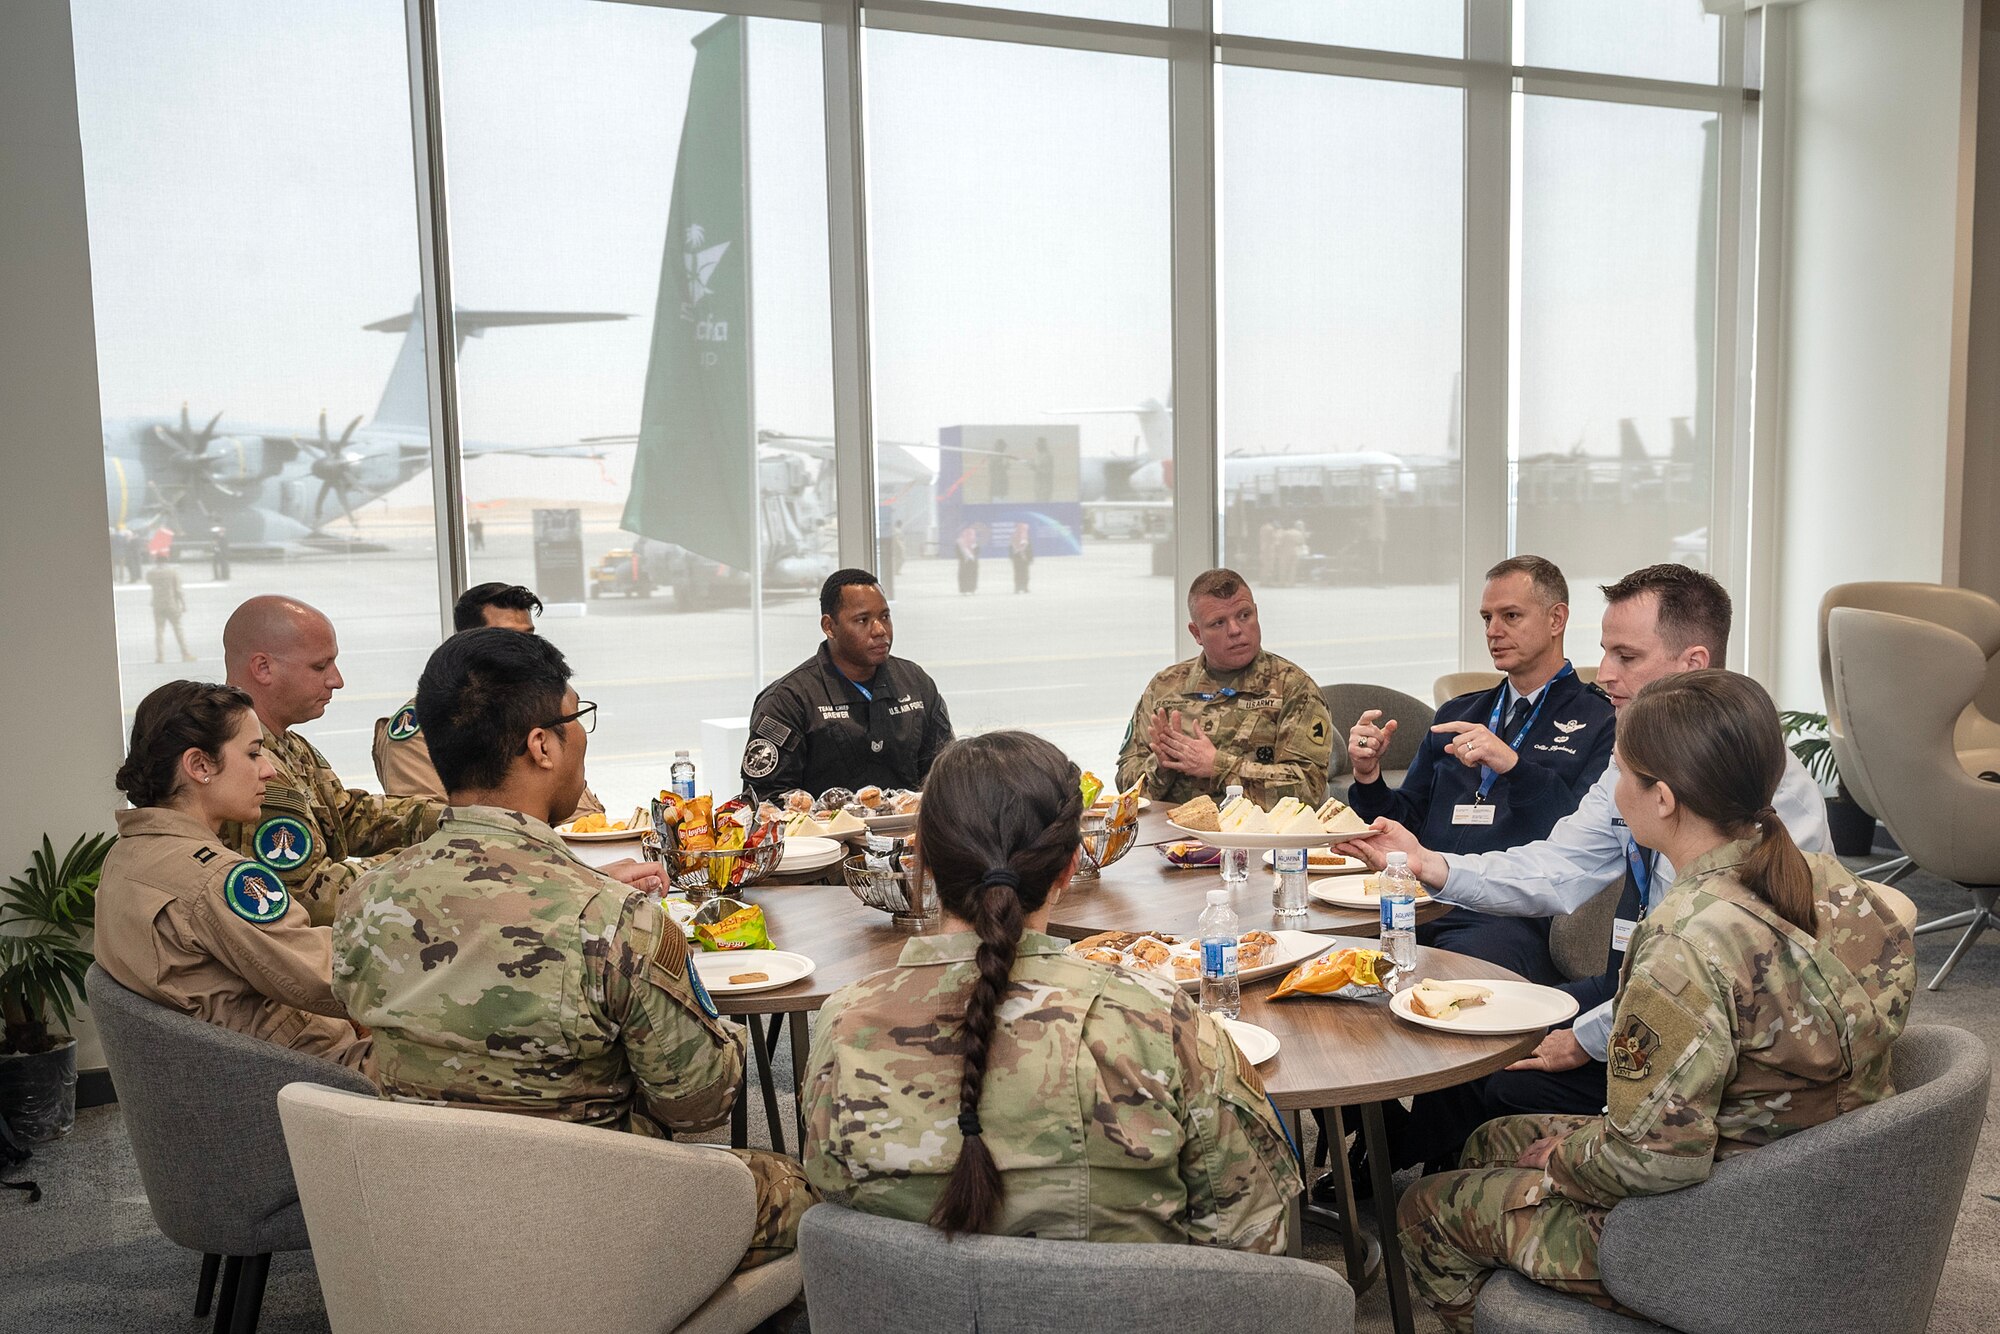 A group sits around a table for lunch.